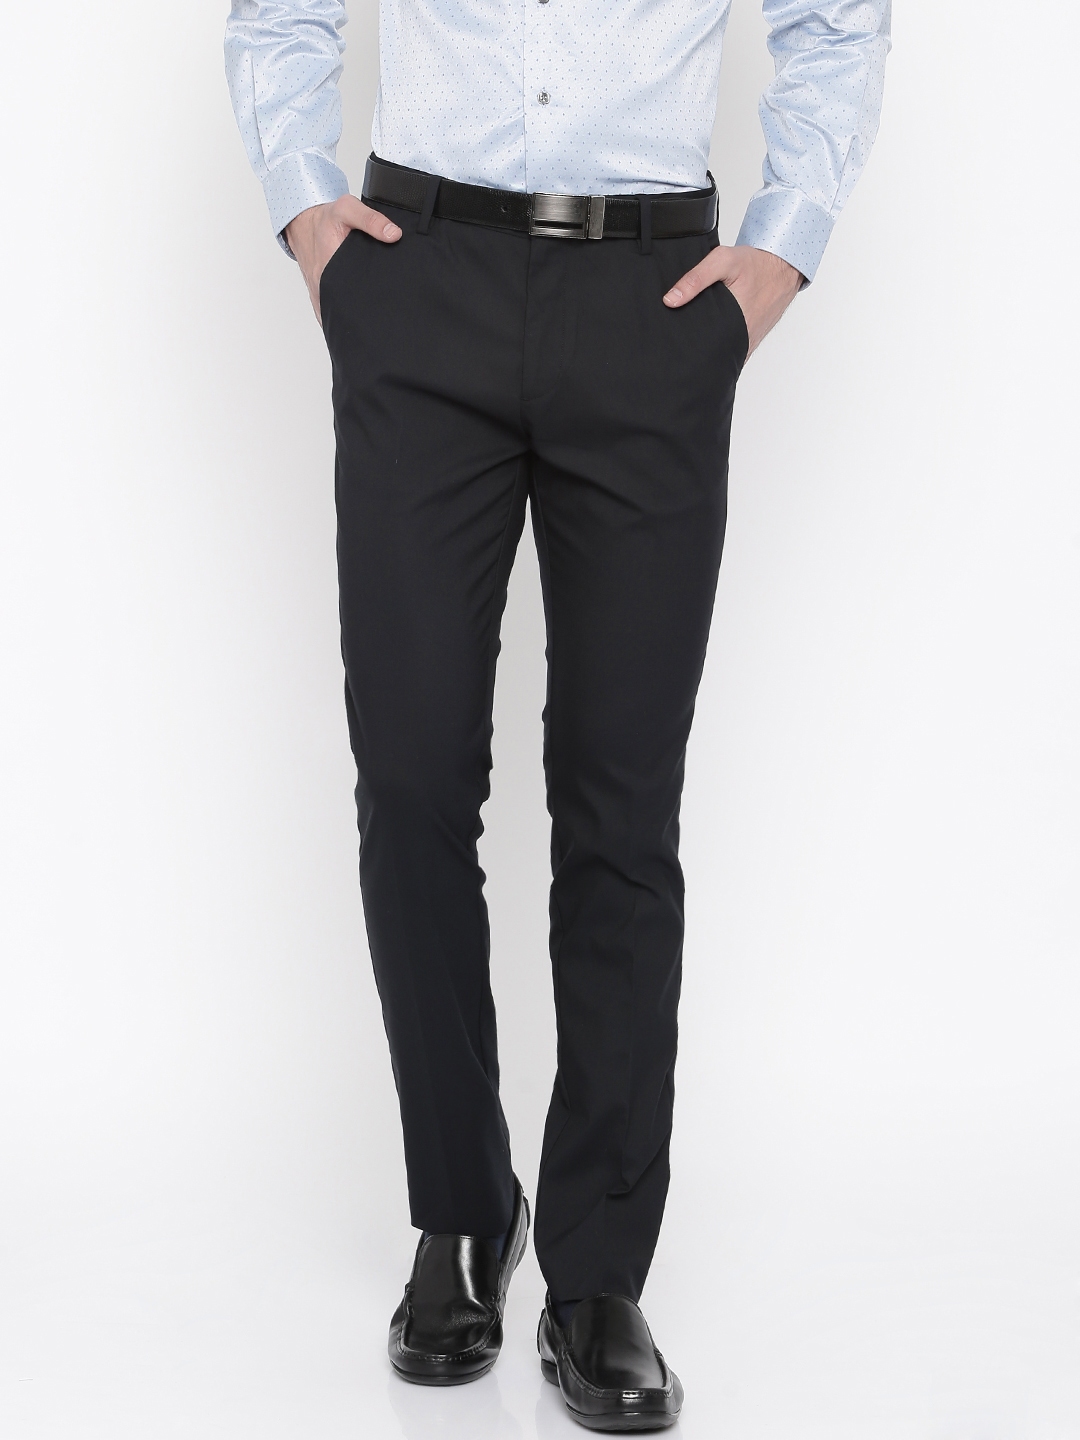 Buy United Colors Of Benetton Men Black Solid Slim Fit Formal Trousers   Trousers for Men 1506474  Myntra